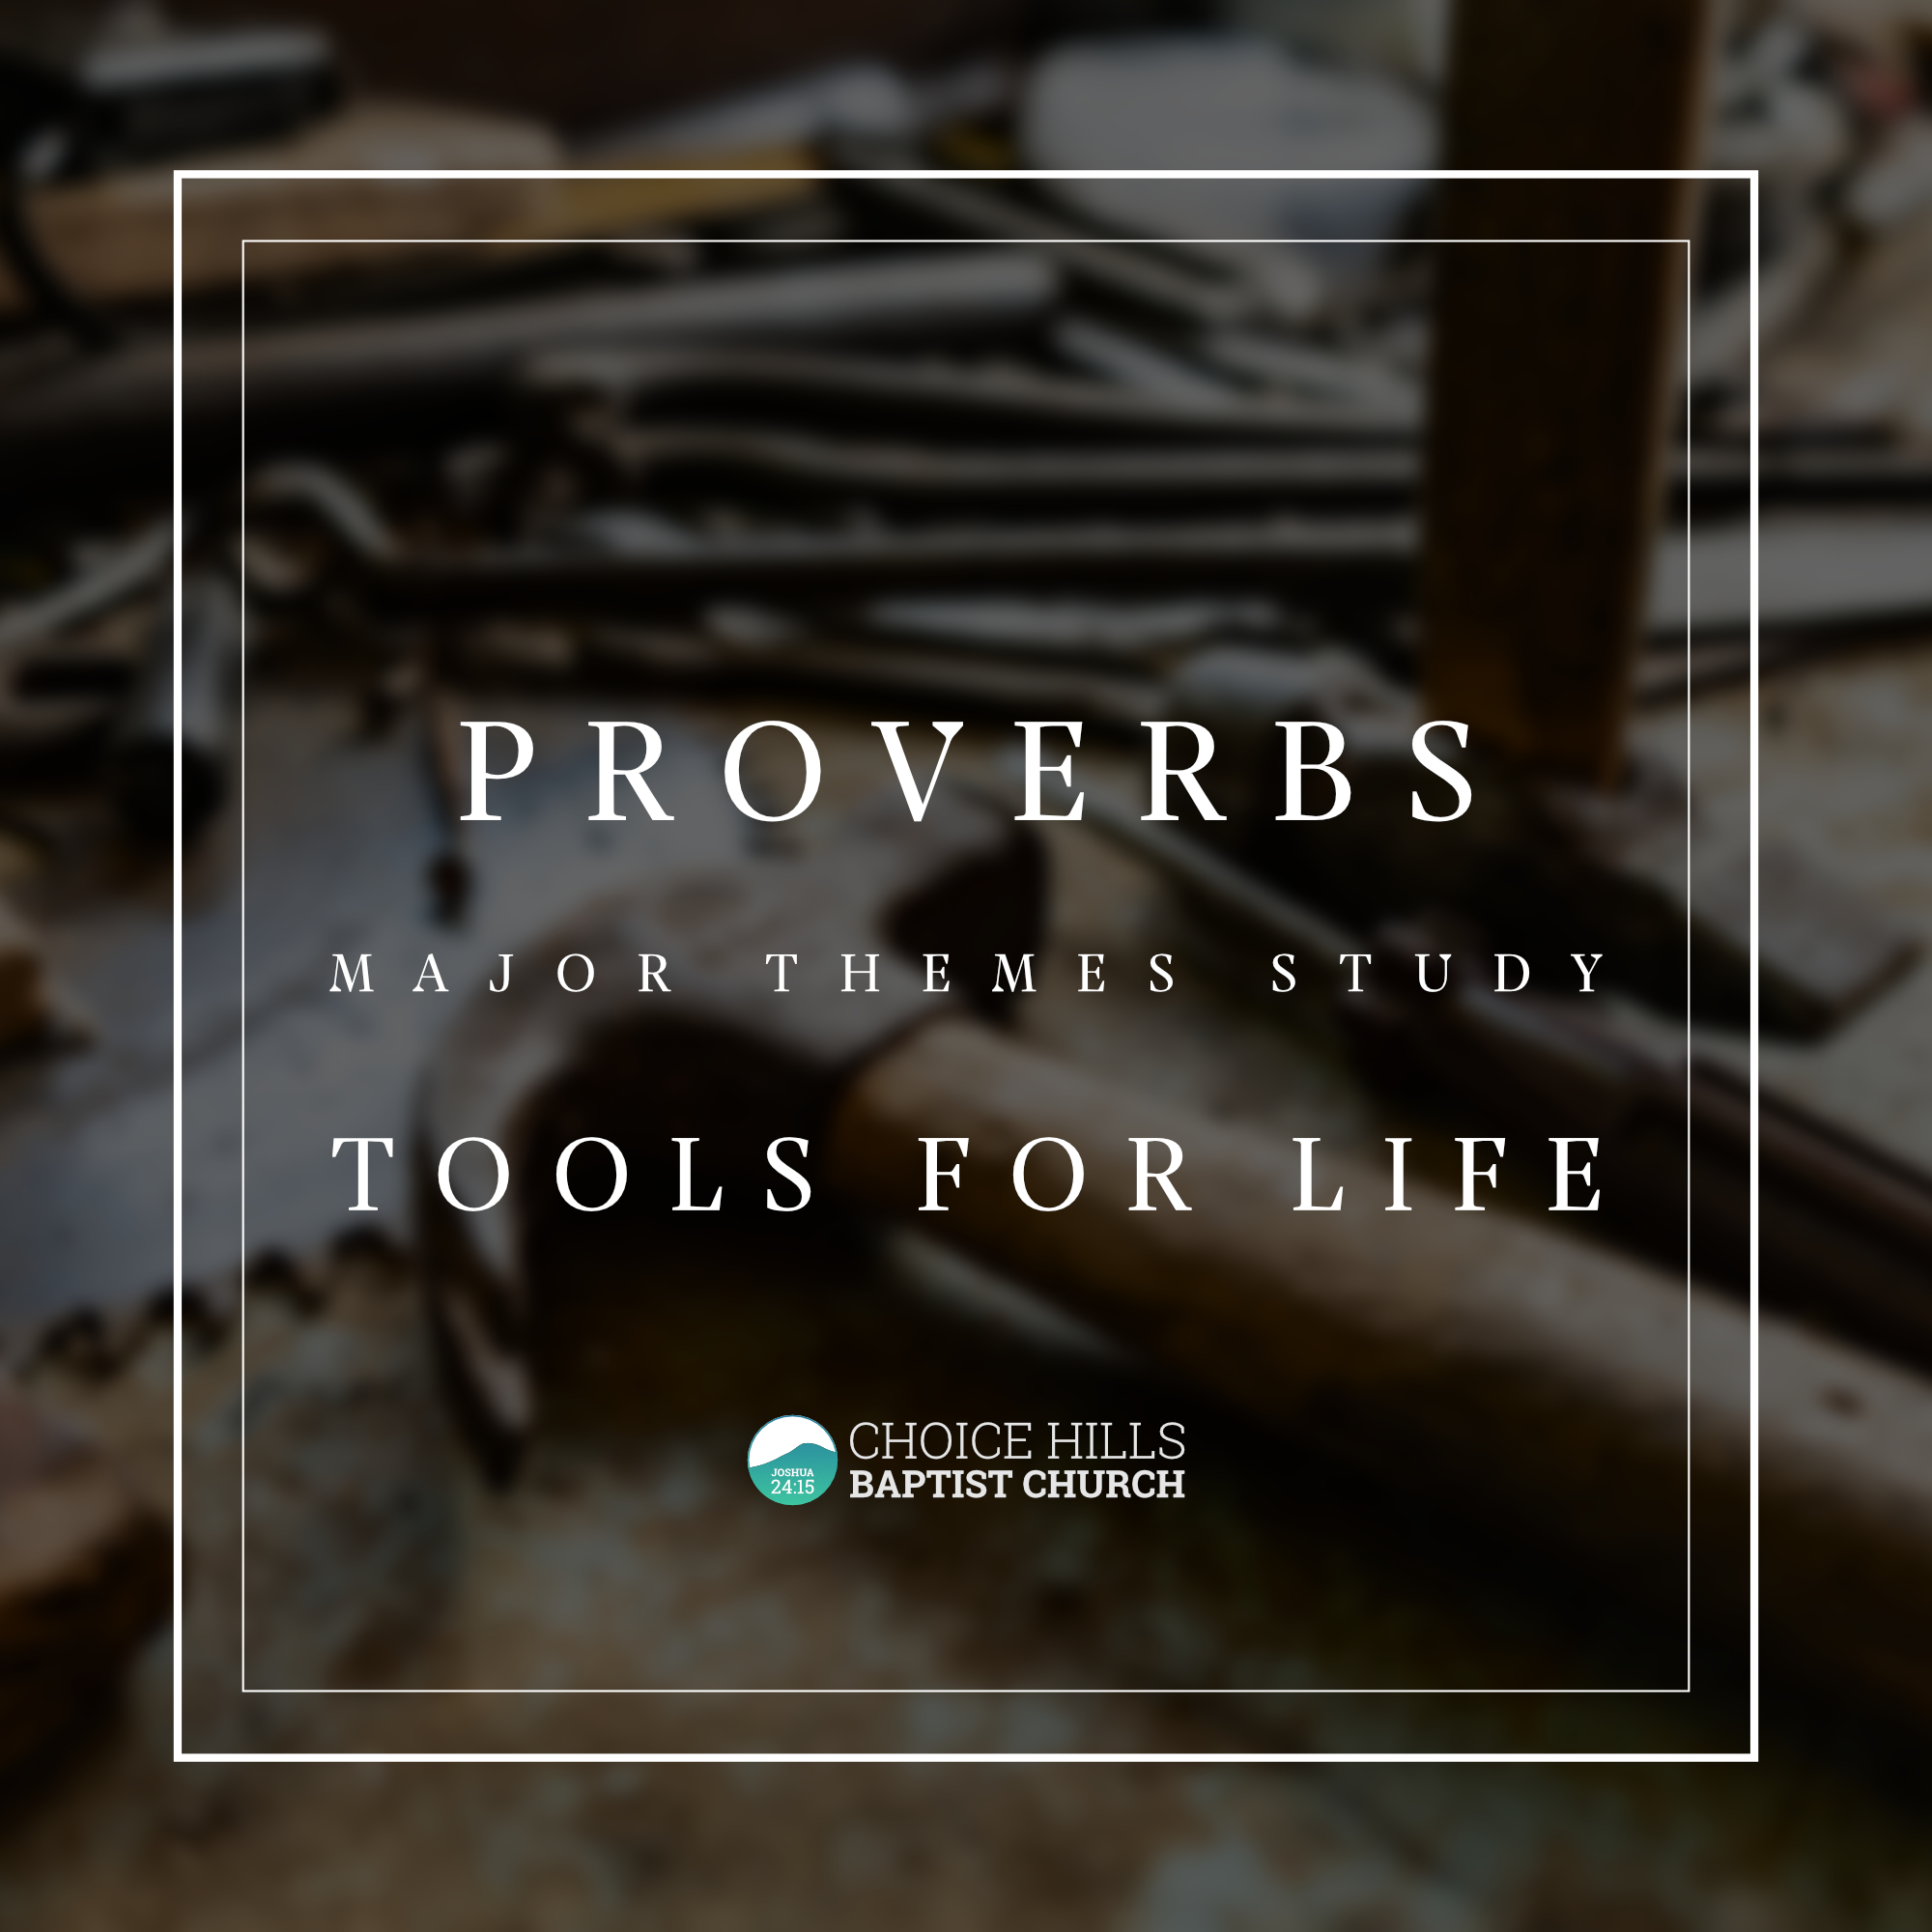 Women in Proverbs (Part 2): The Virtuous Woman